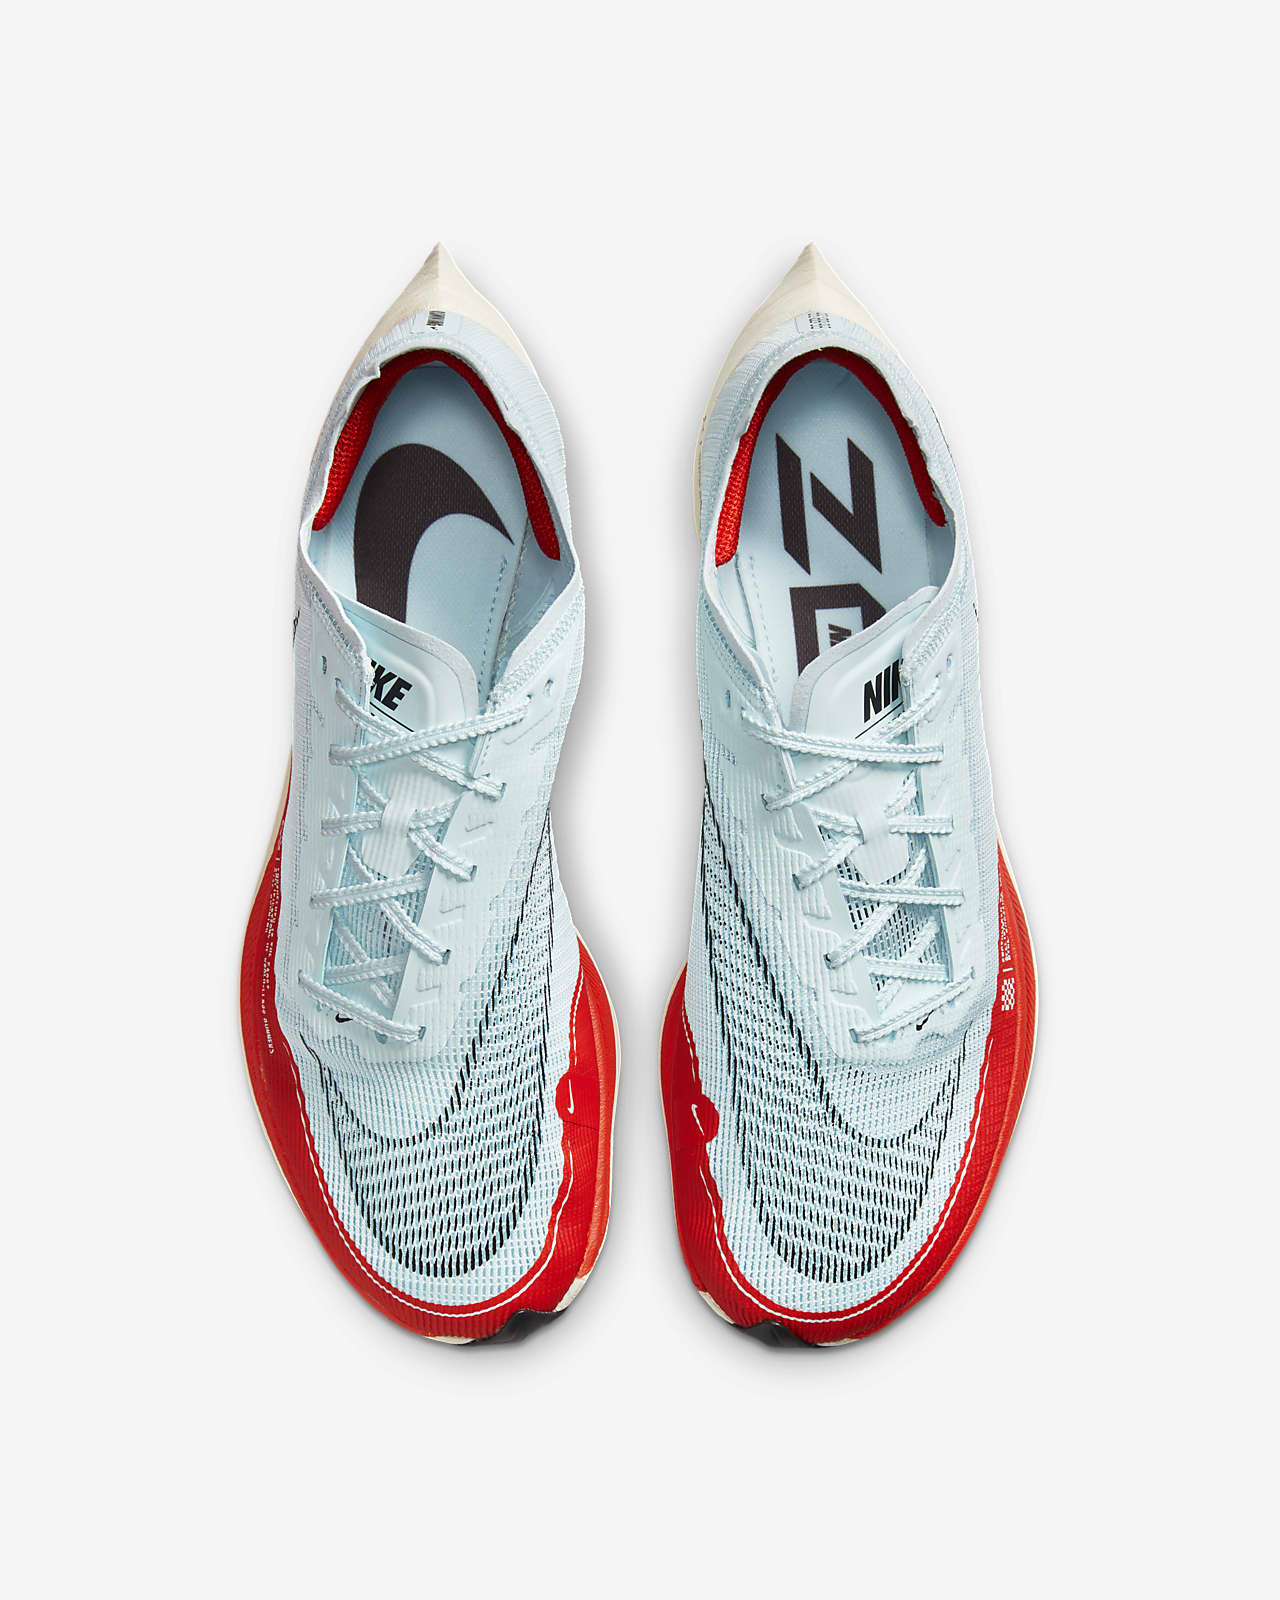 vaporfly next percent for sale